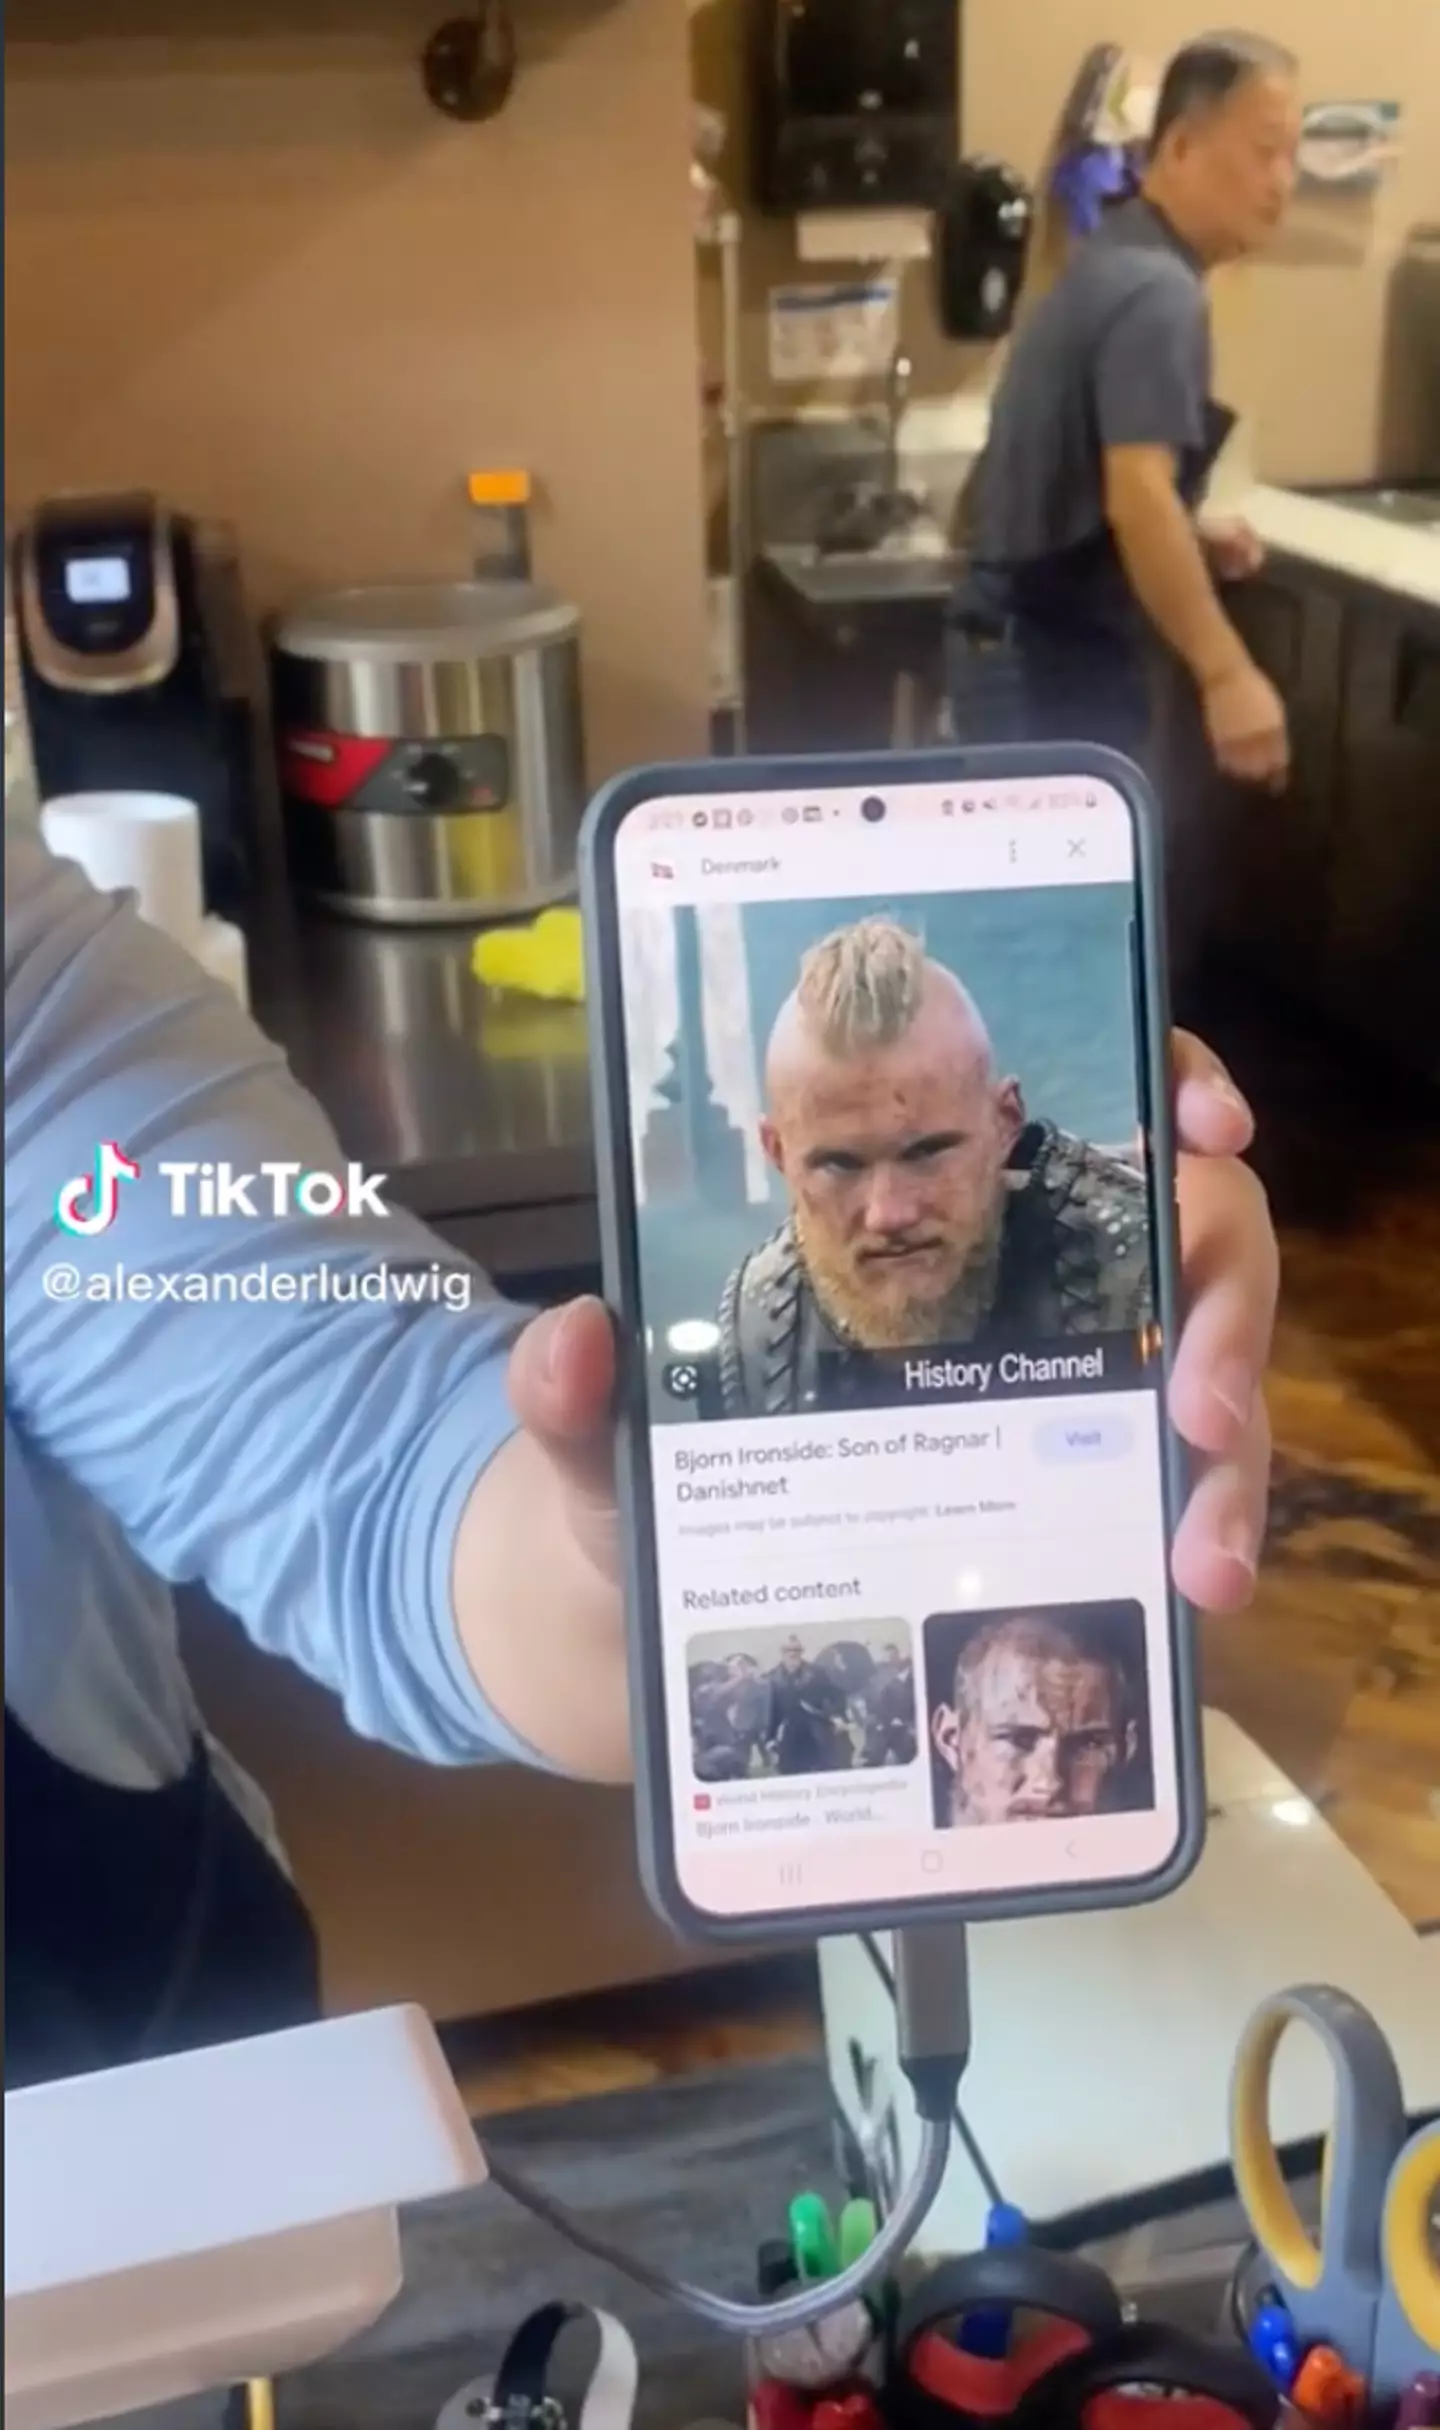 The coffee shop worker held up her phone to show Alexander Ludwig a photo of… Alexander Ludwig.